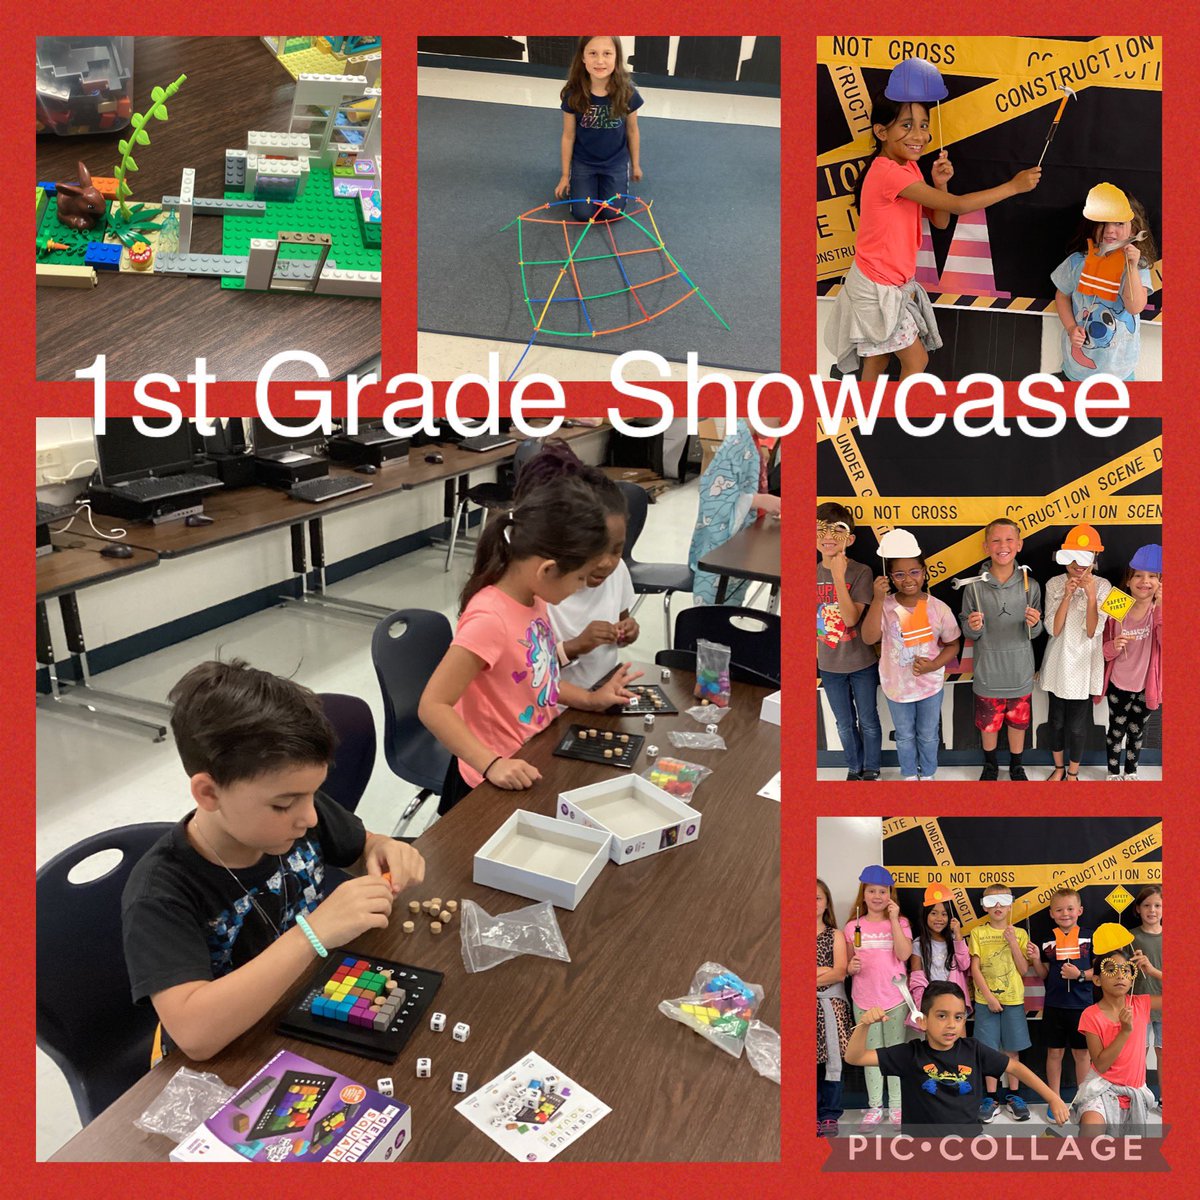 Thank you to all the parents and students for an amazing GT Showcase last week!  Parents had an opportunity to experience GT Skill Stations alongside their children and learn about their creations throughout the year. This is Why GT! @NISDBoldt @NISDGTAA @SillerRosie #whygt